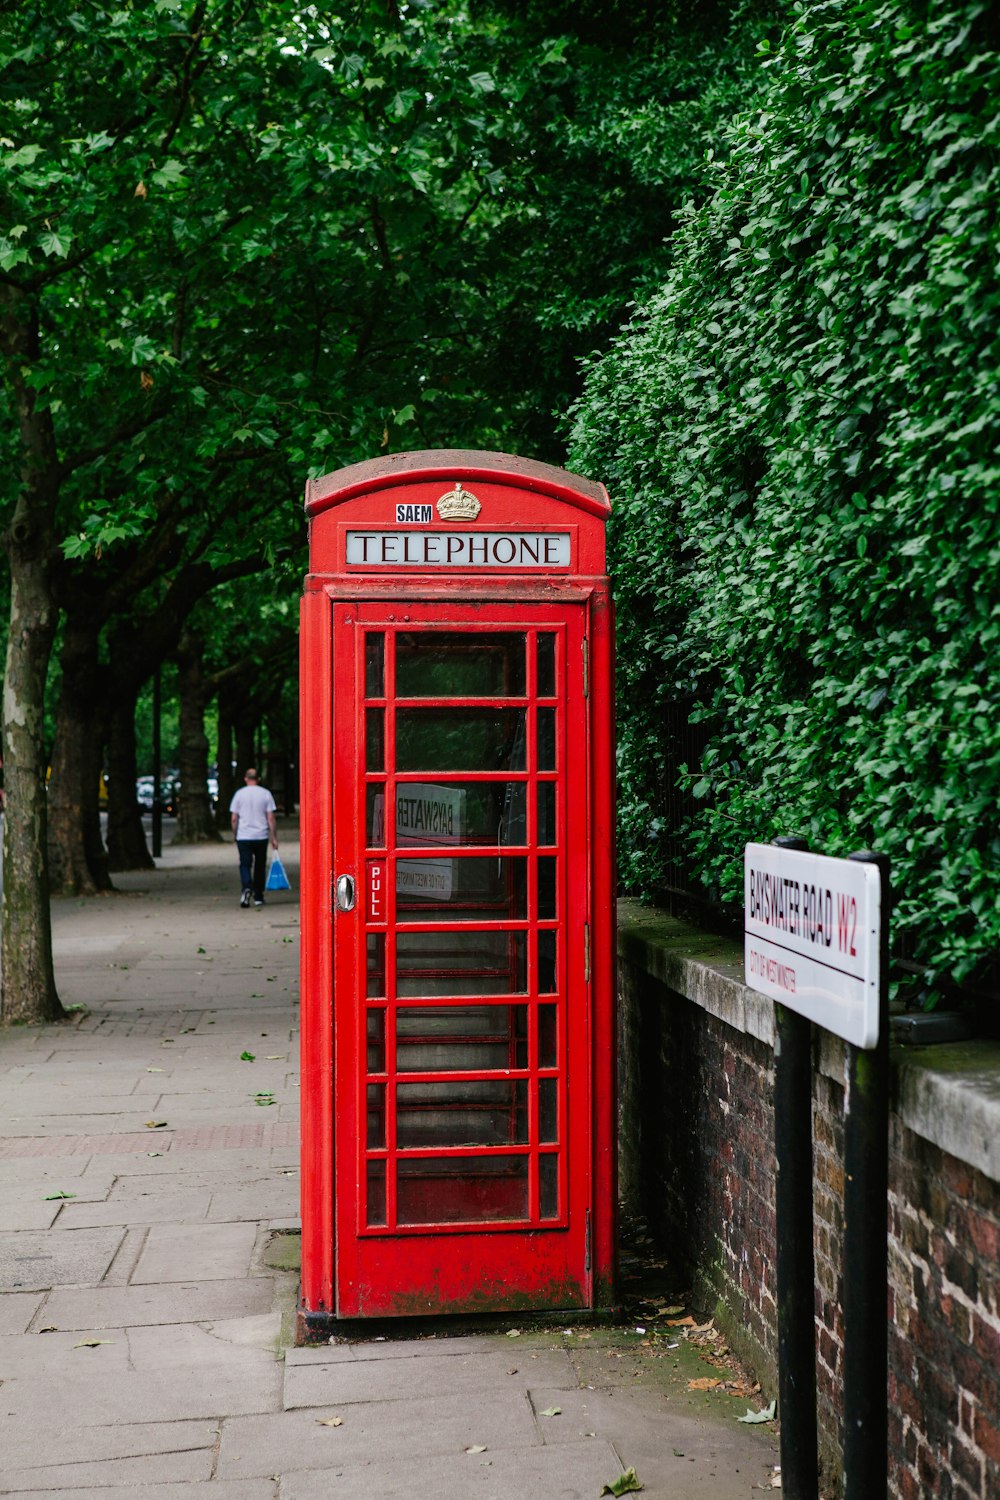 red telephone booth near green trees during daytime